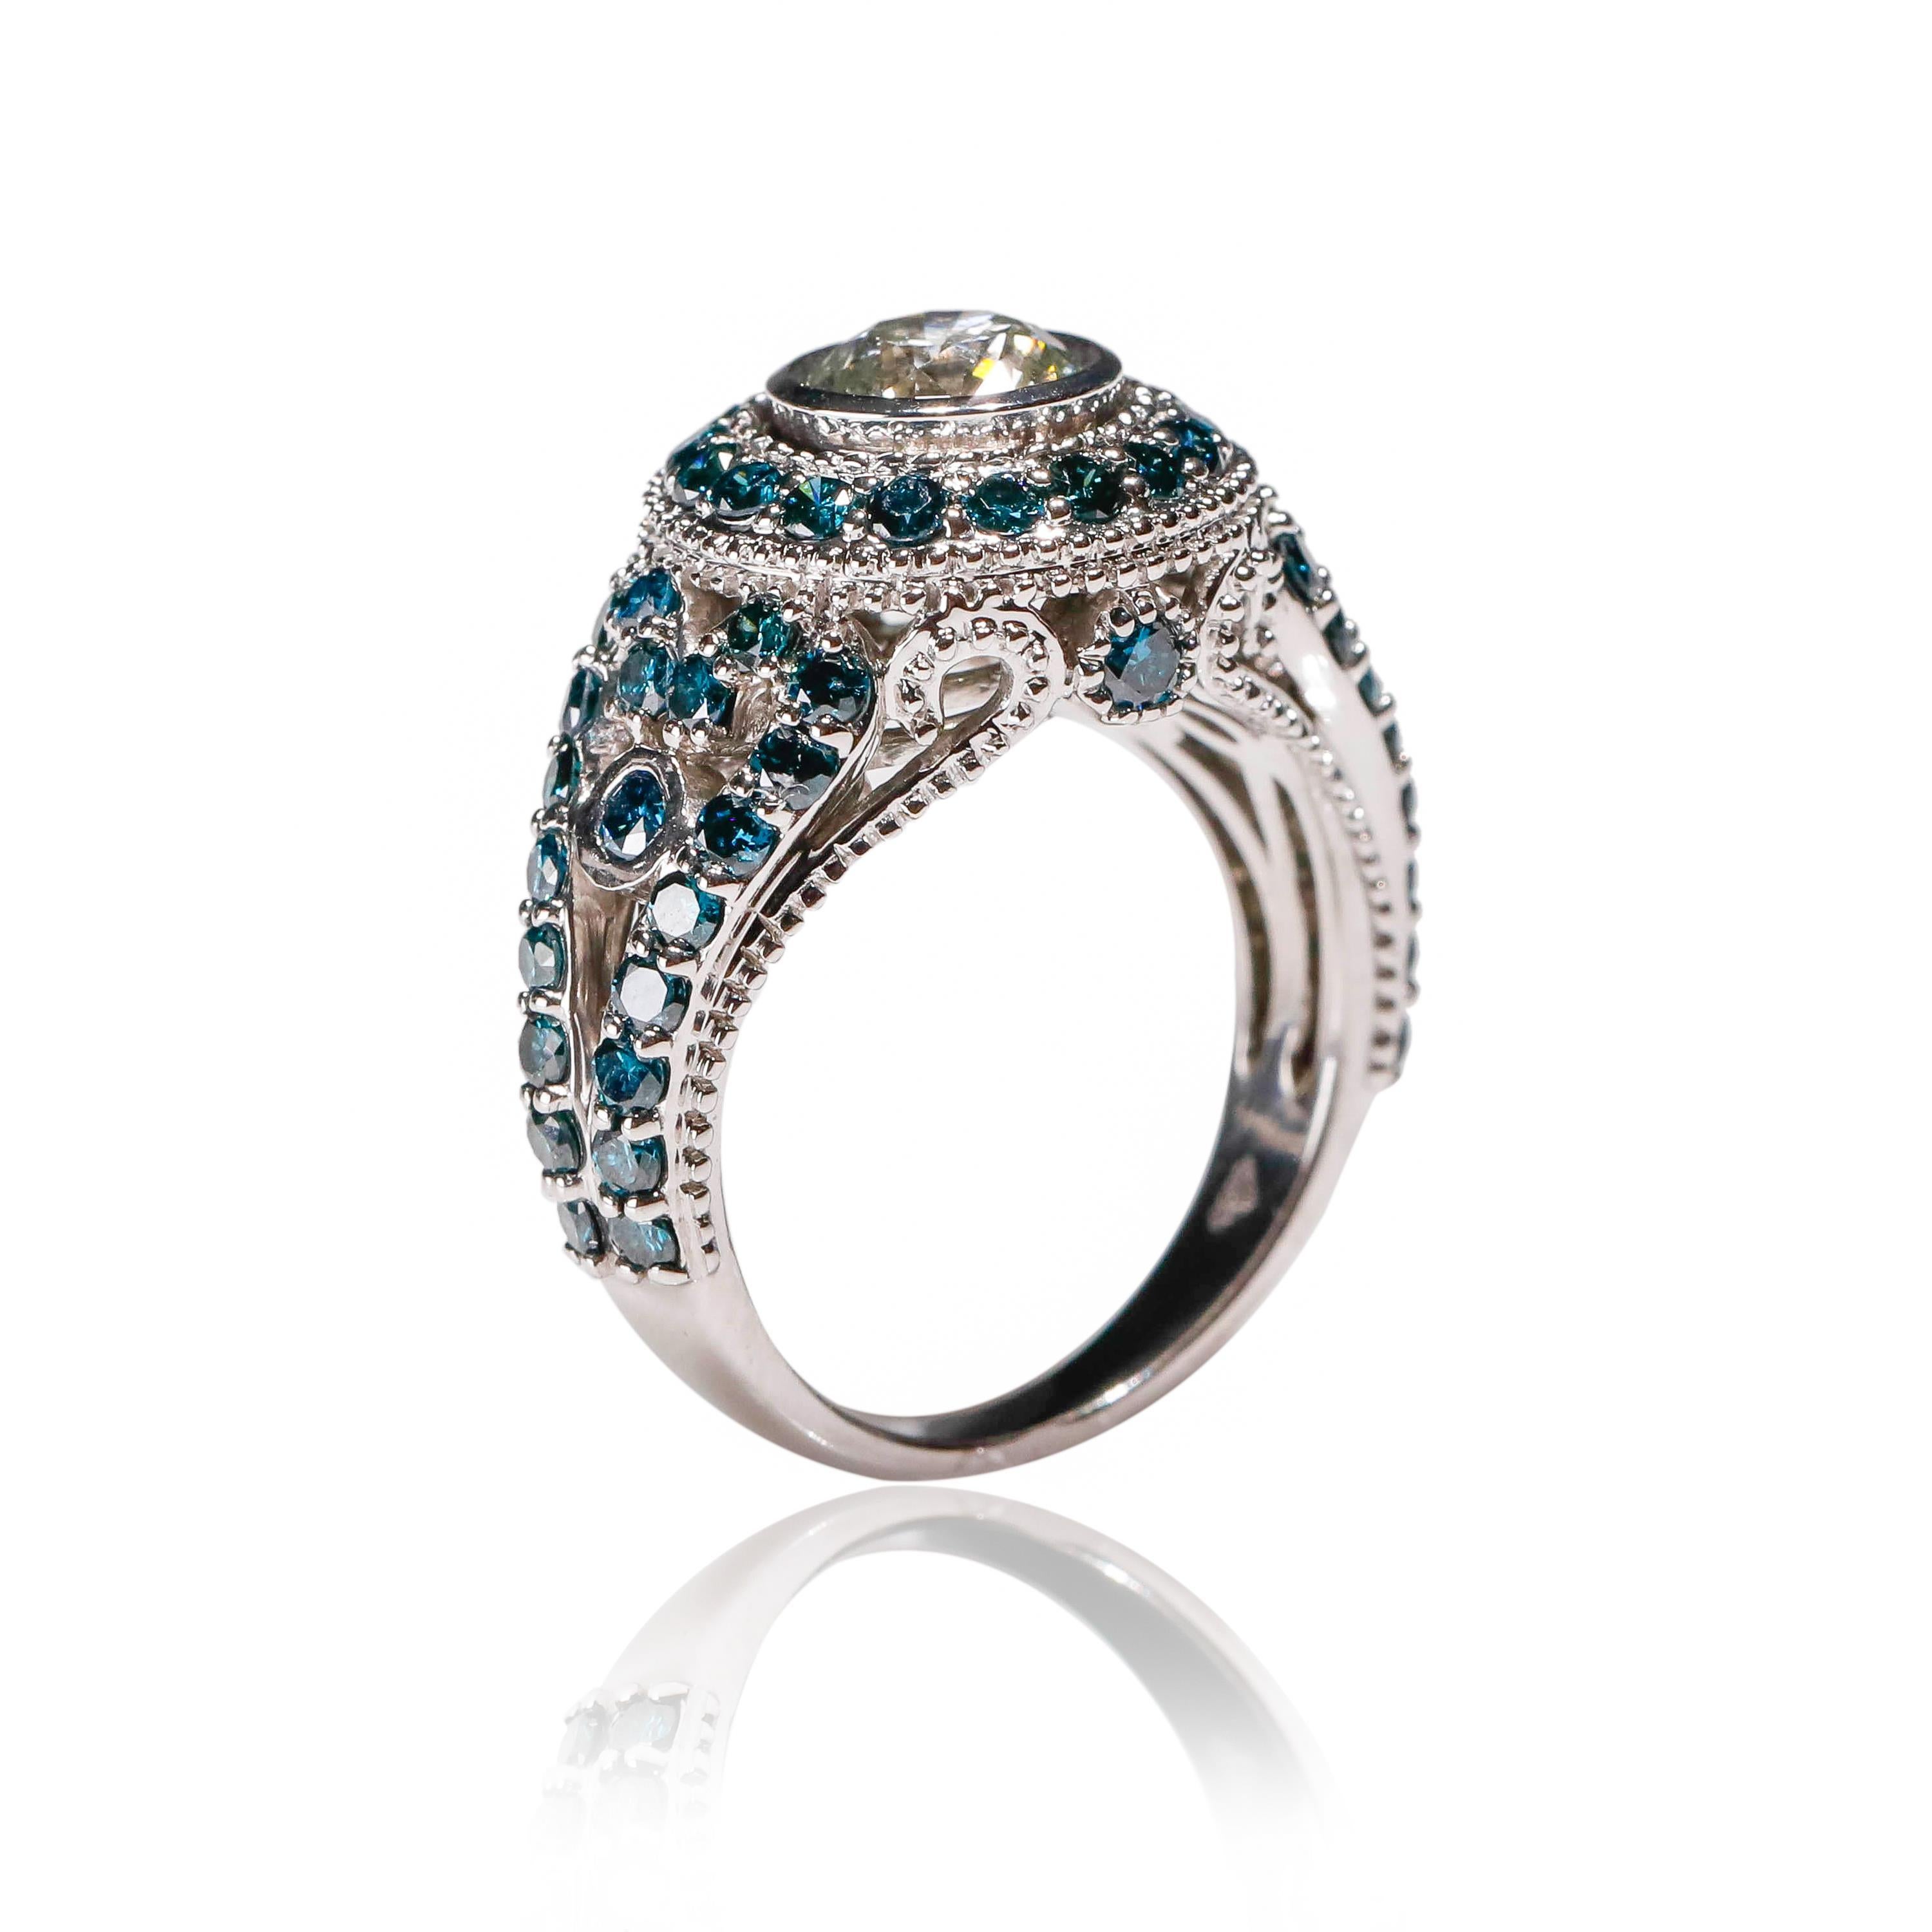 1.7 CT Blue Diamond 0.83 CT White Diamond Cocktail Ring 14KT White Gold 

Luxurious in every way, this ring is a stunning example of how you should feel wearing it. Features 0.83 tcw shimmering diamonds aligned together in 1.7 TCW of a deep blue